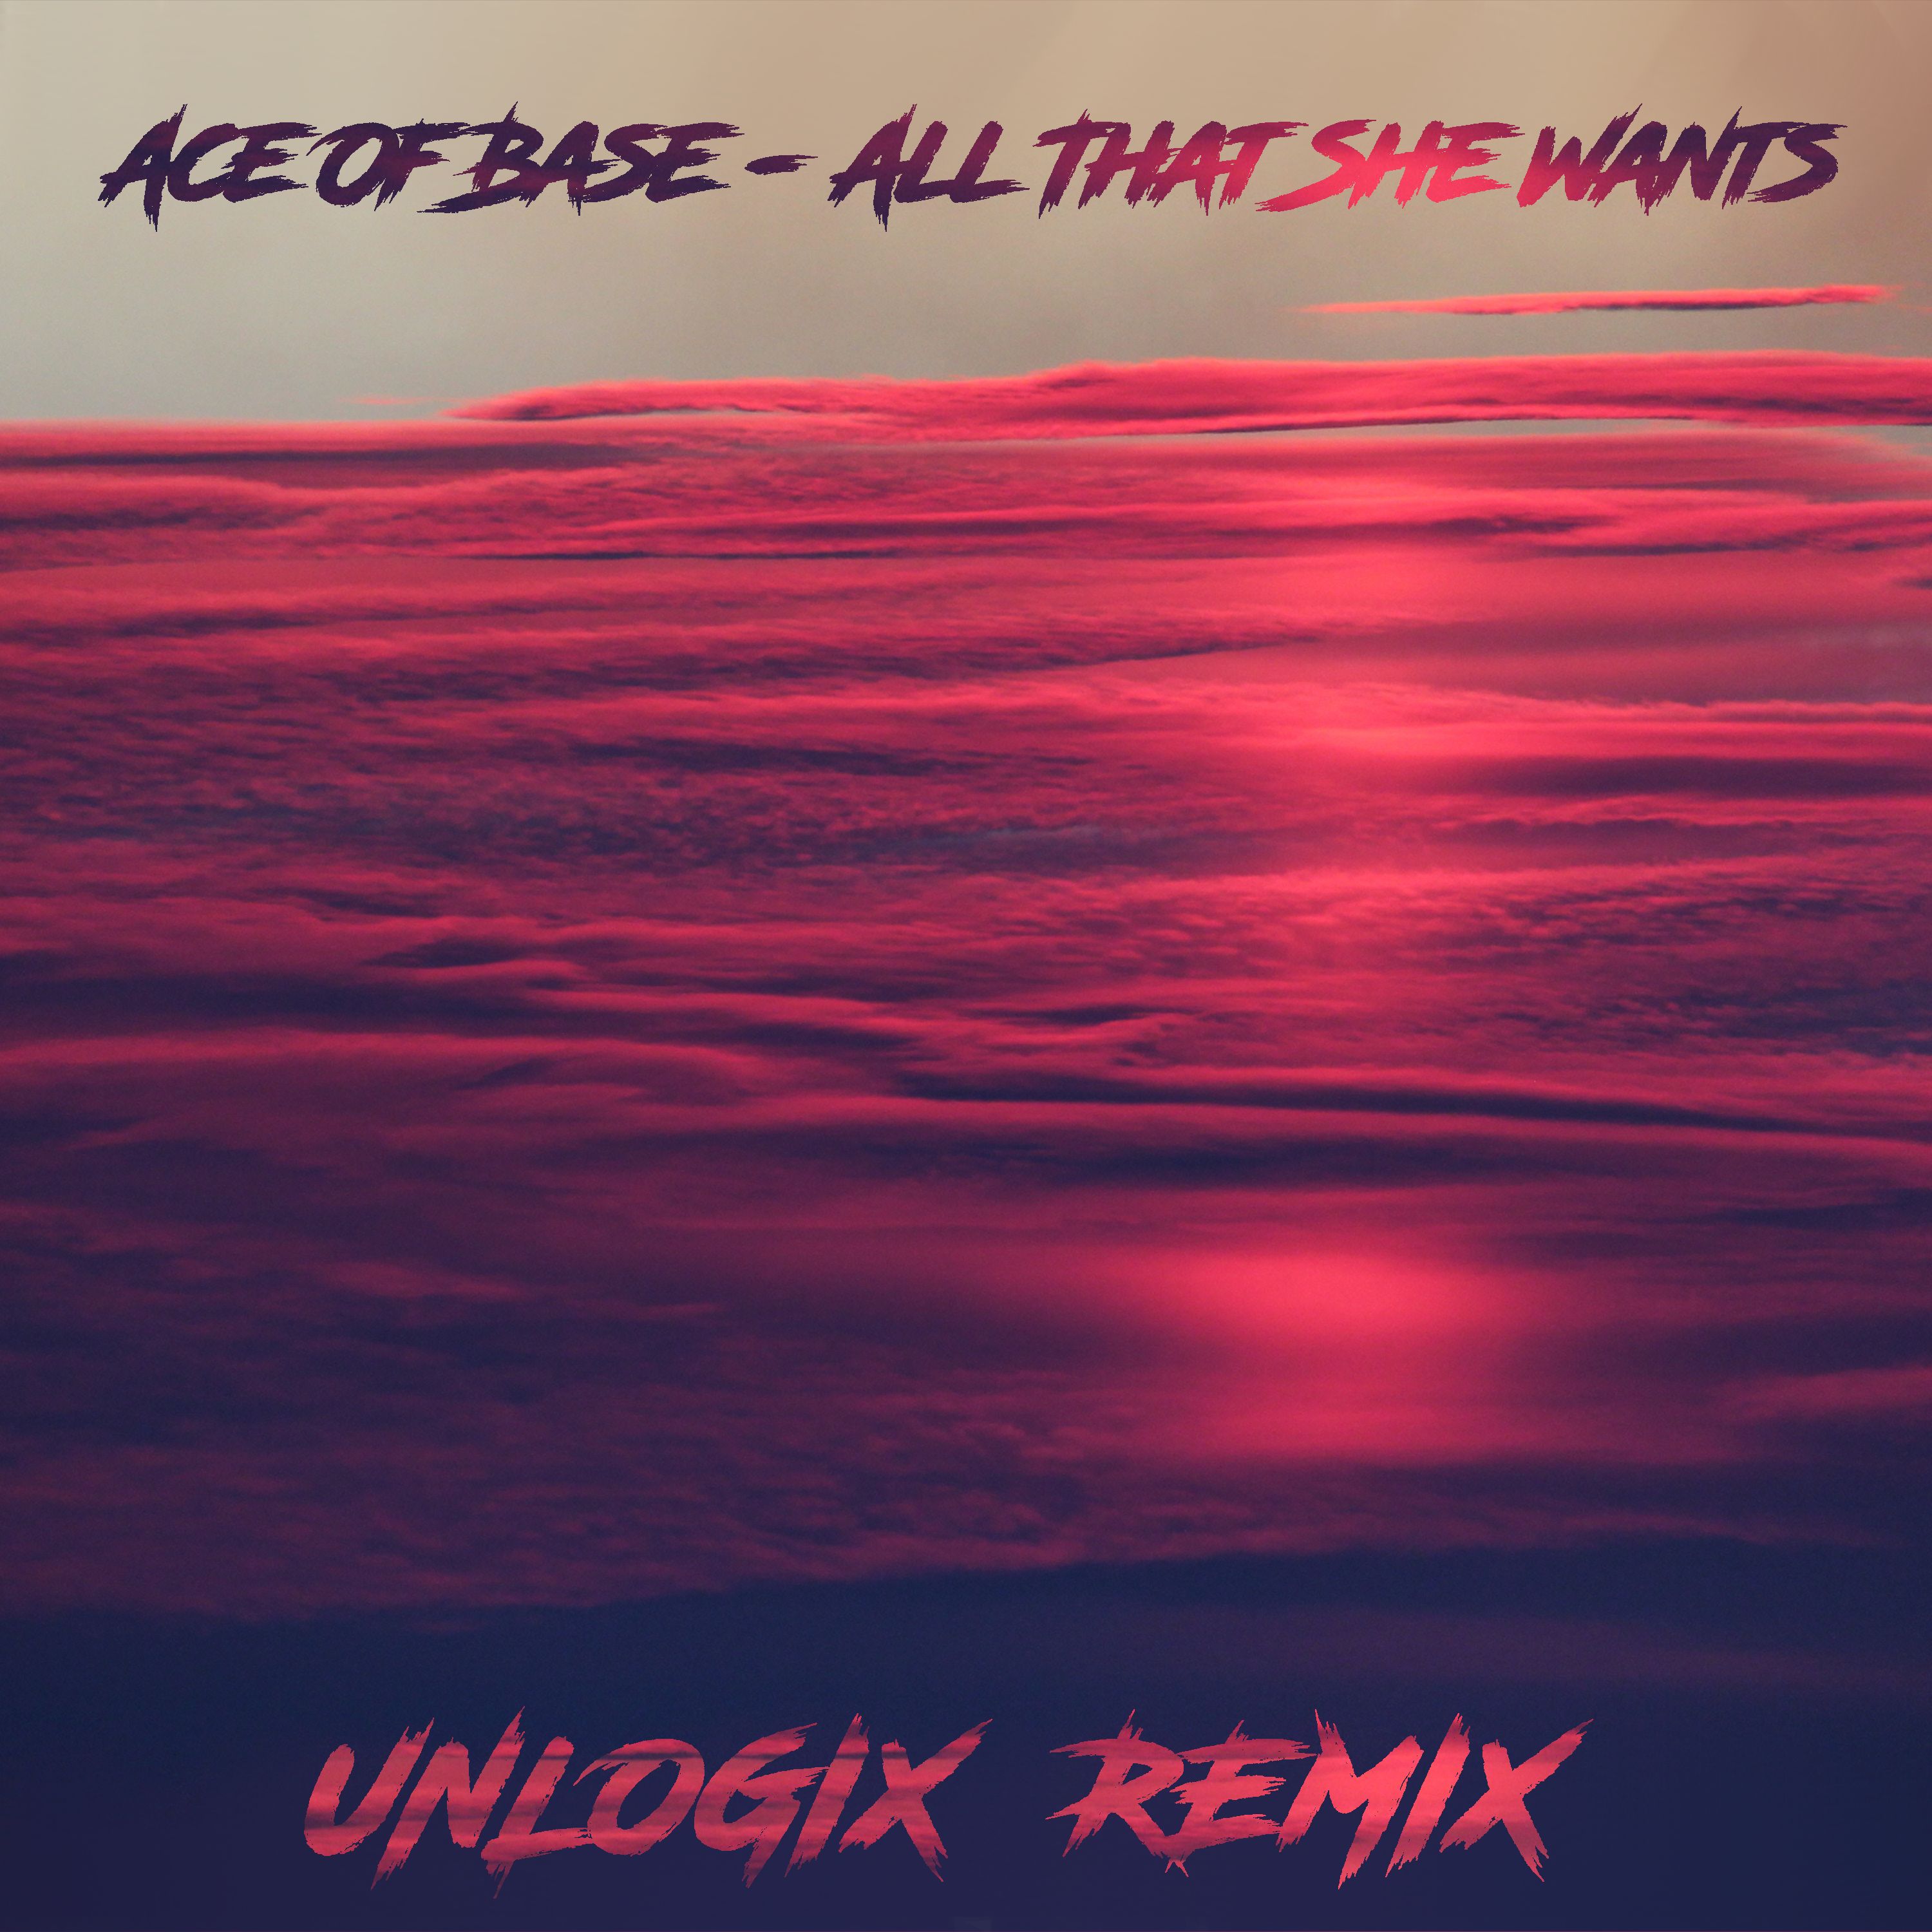 Unduh Ace Of Base - All That She Wants ( Unlogix Remix ) "FREE DOWNLOAD"